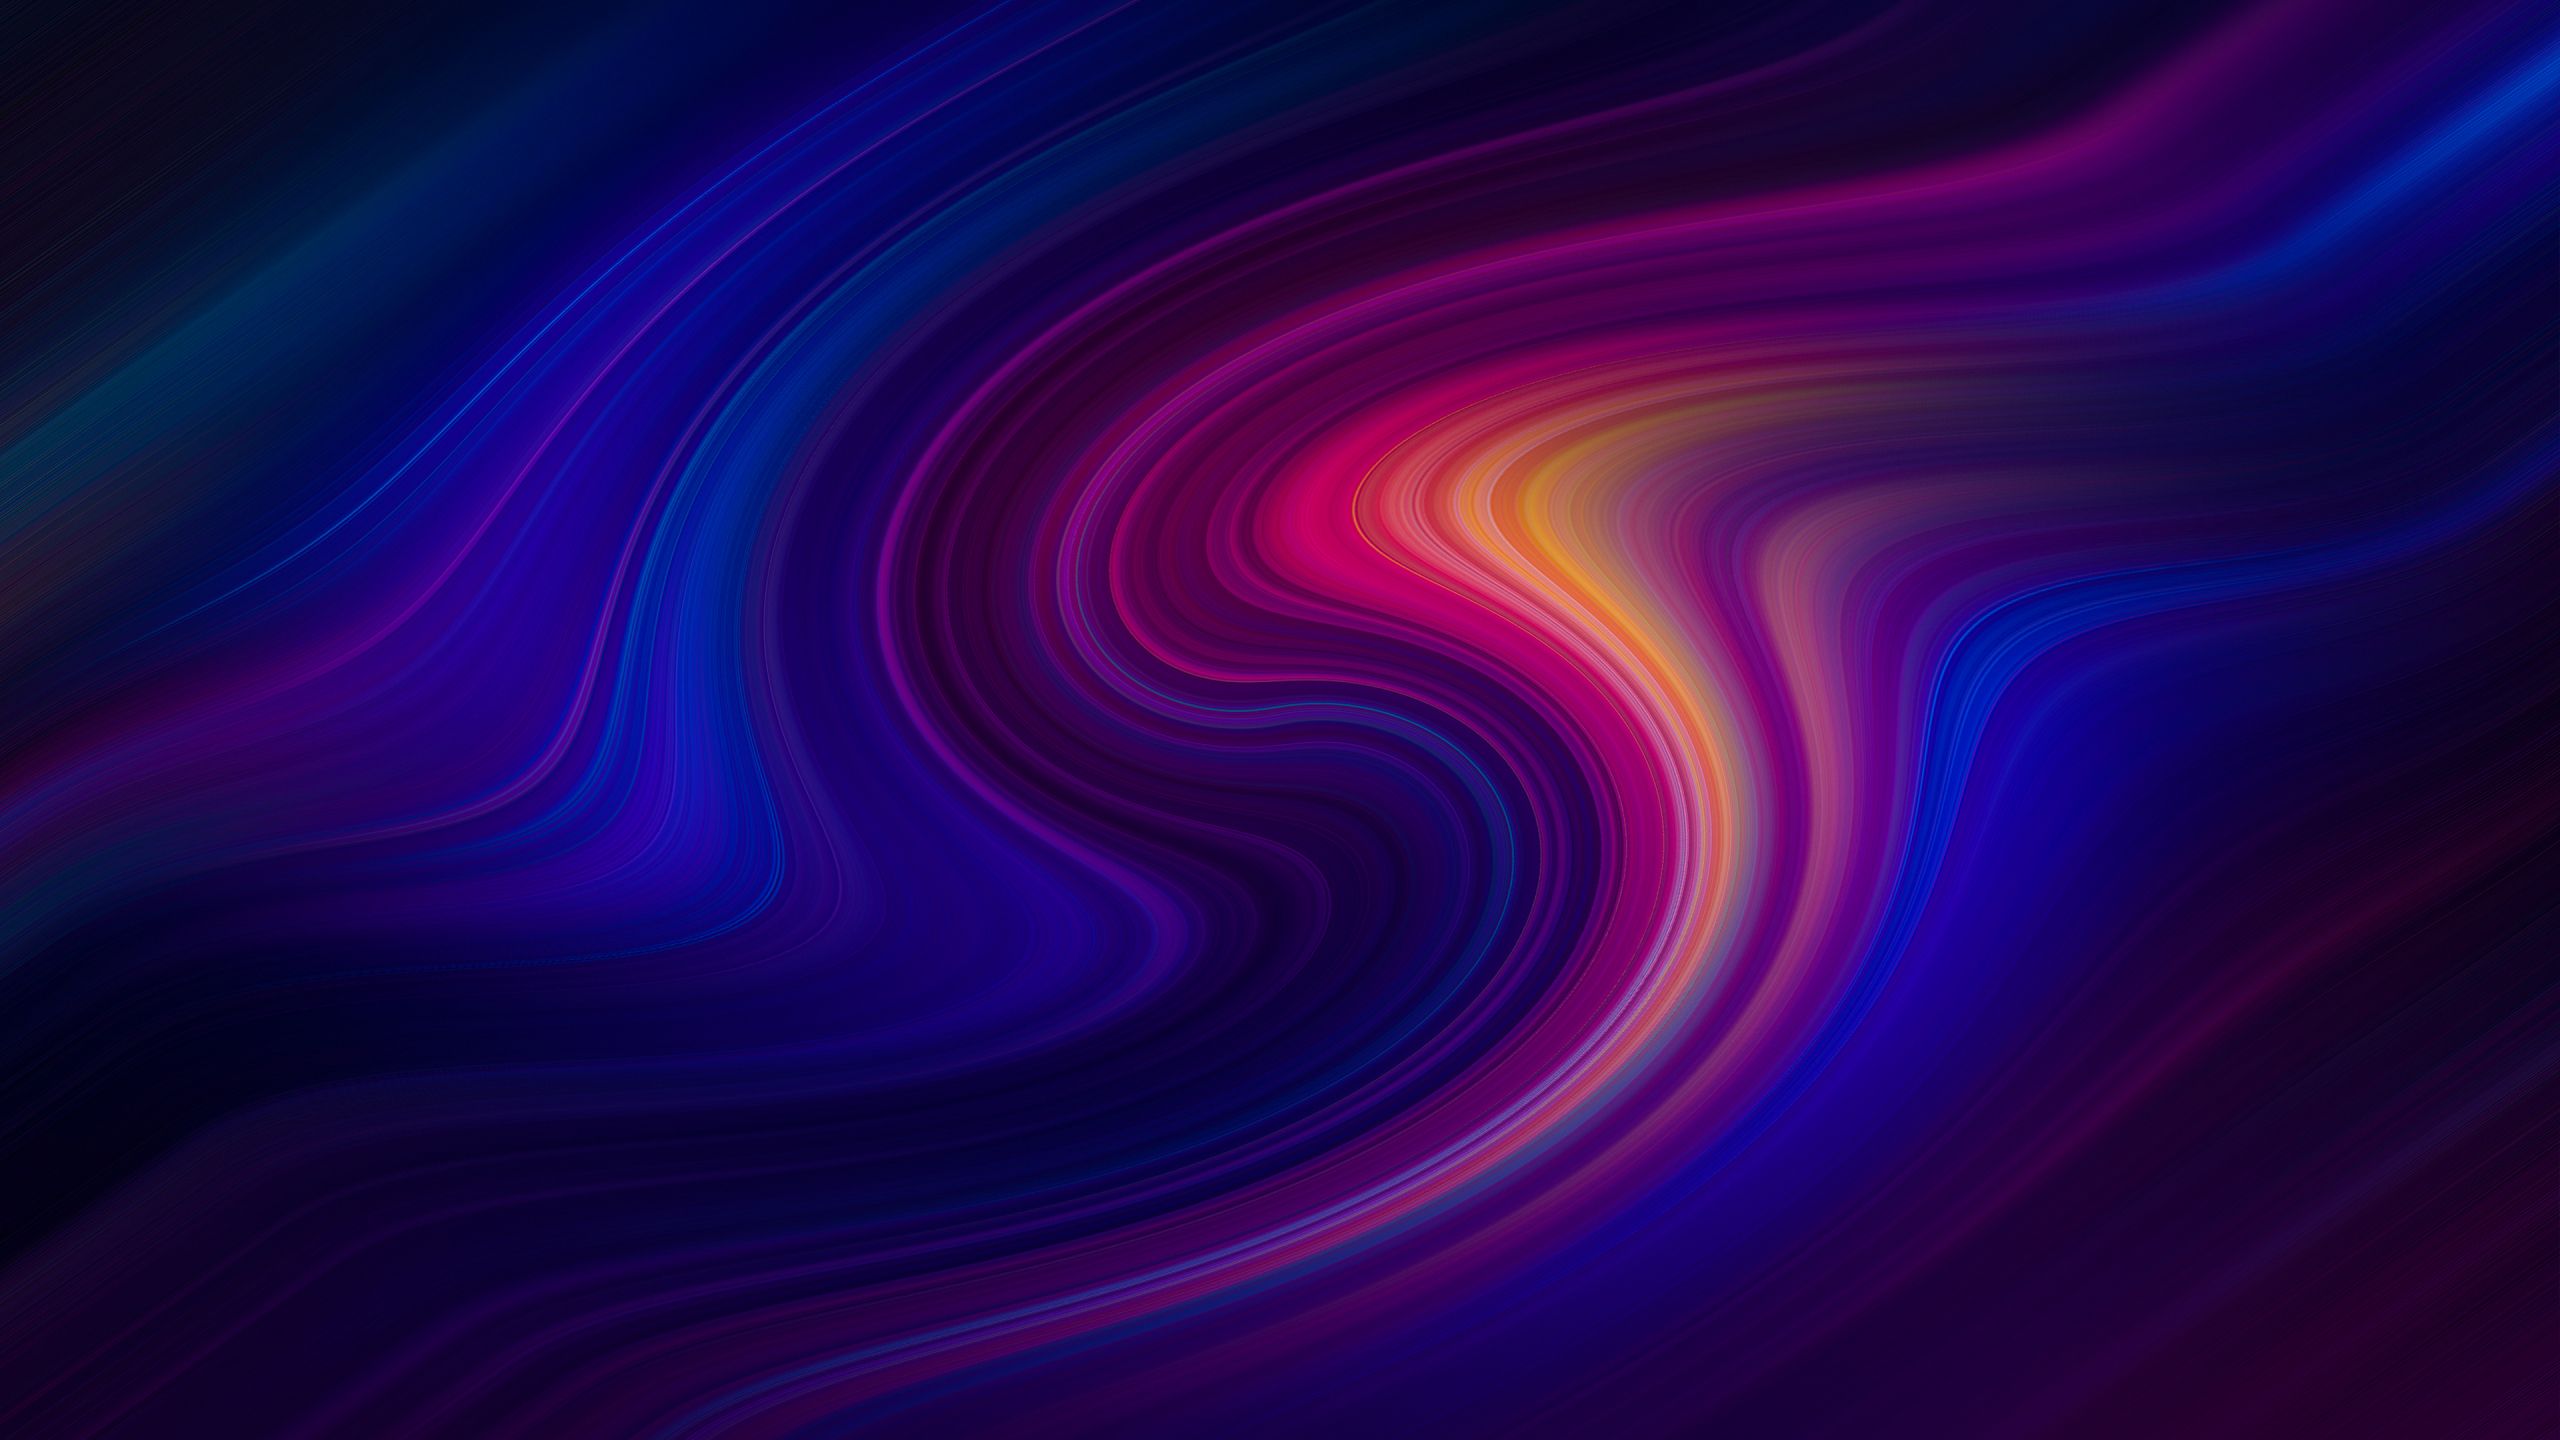 Free download 2560x1440 Swirl Digital Abstract 1440P Resolution Wallpaper HD [2560x1440] for your Desktop, Mobile & Tablet. Explore Swirls Abstract 4k WallpaperK Abstract Wallpaper, 4K Abstract Wallpaper, Swirls Wallpaper